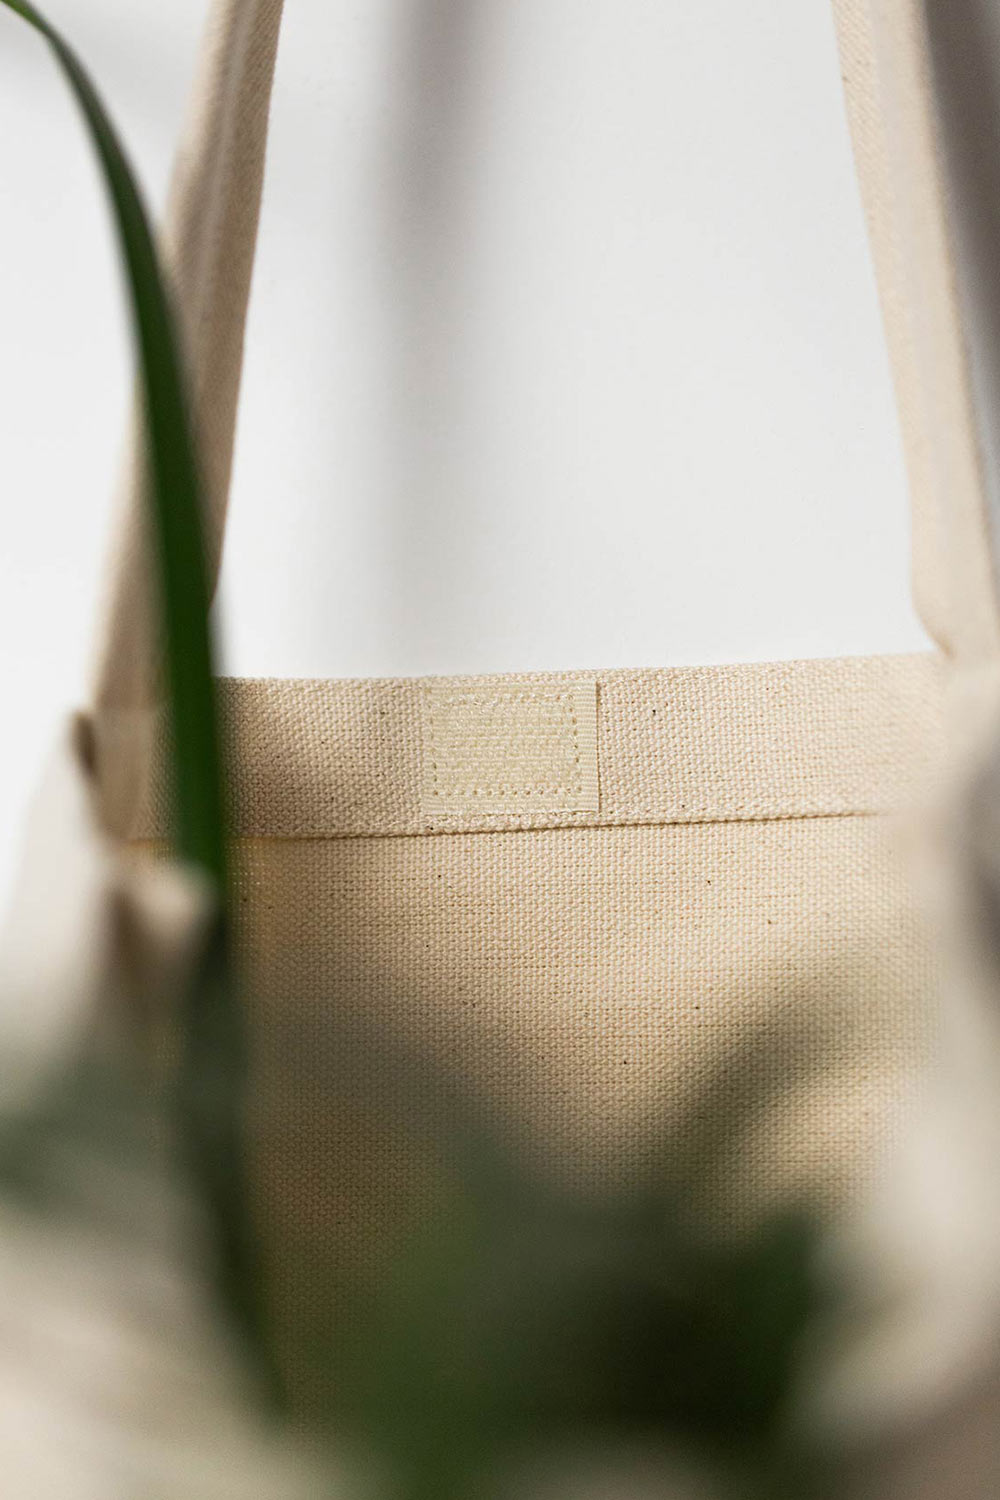 Velcro detail in the interior of the black cat and plants cotton tote bag by Mauverien.